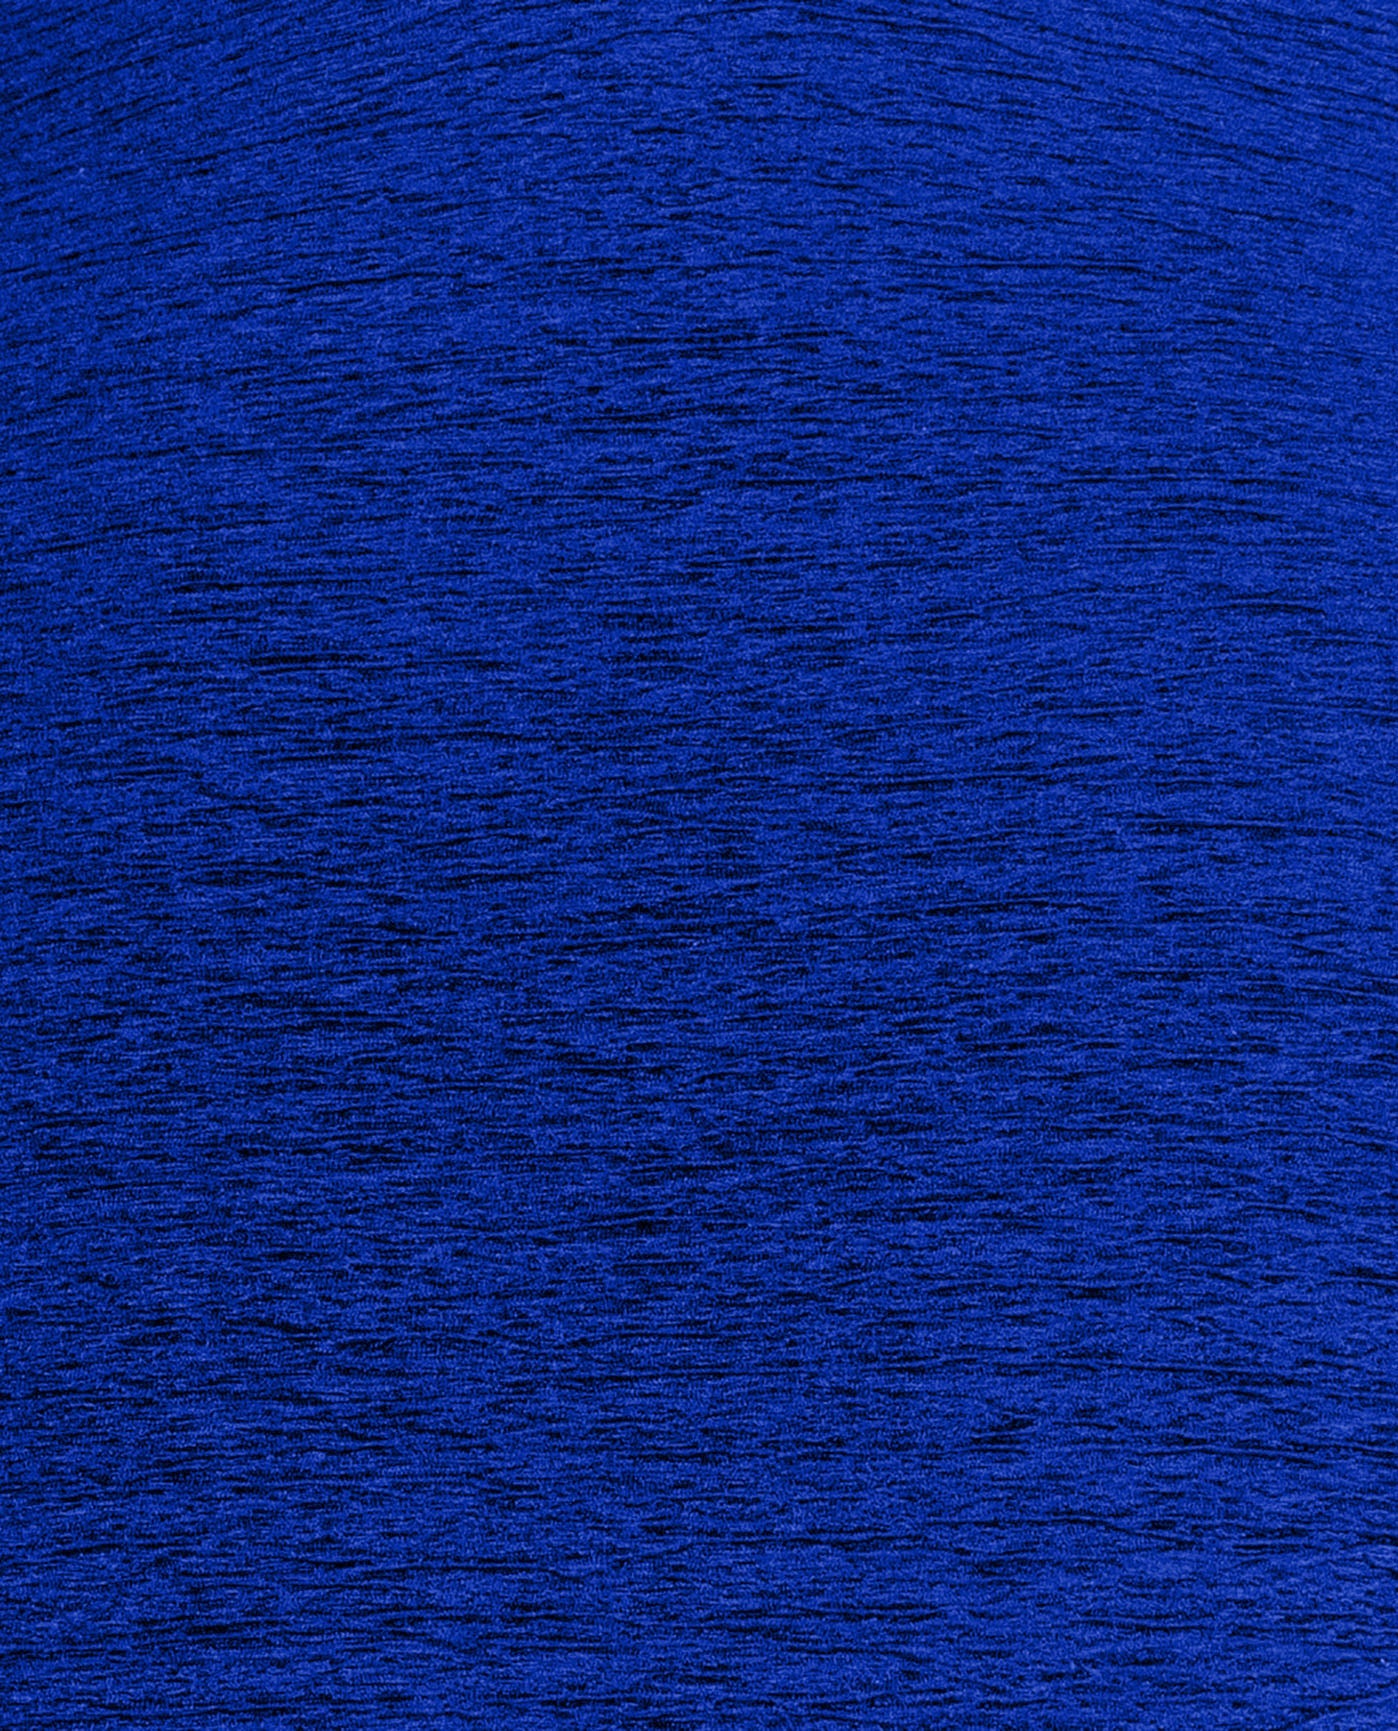 FABRIC SWATCH VIEW OF CHLORINE RESISTANT KRINKLE TEXTURED SOLID TWIST FRONT LONG TORSO ONE PIECE | KRINKLE ROYAL